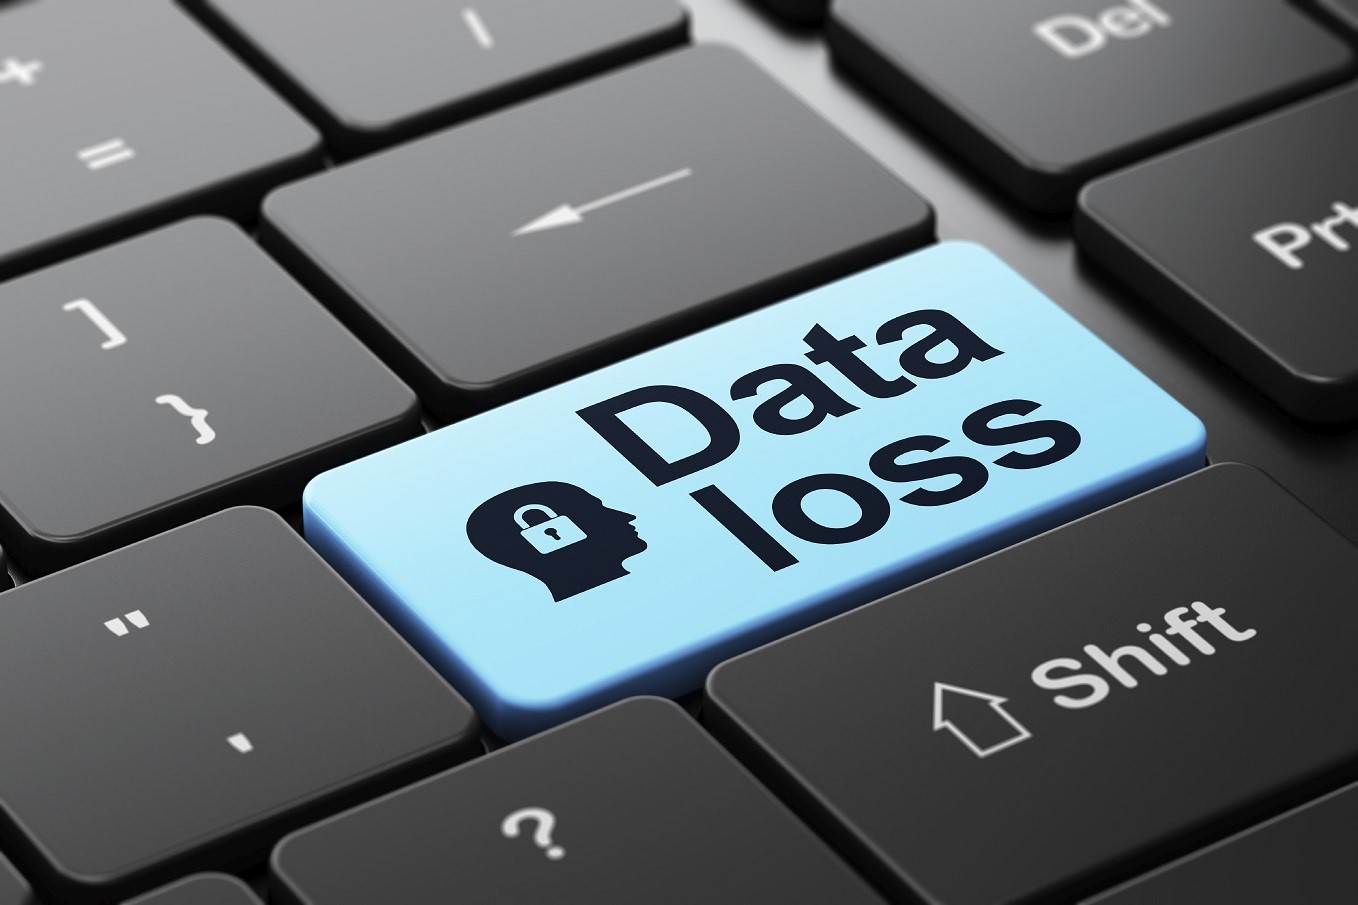 Data loss is becoming a bigger problem for more users. March 31st is World Back-up Day. Take action to back-up your data now.